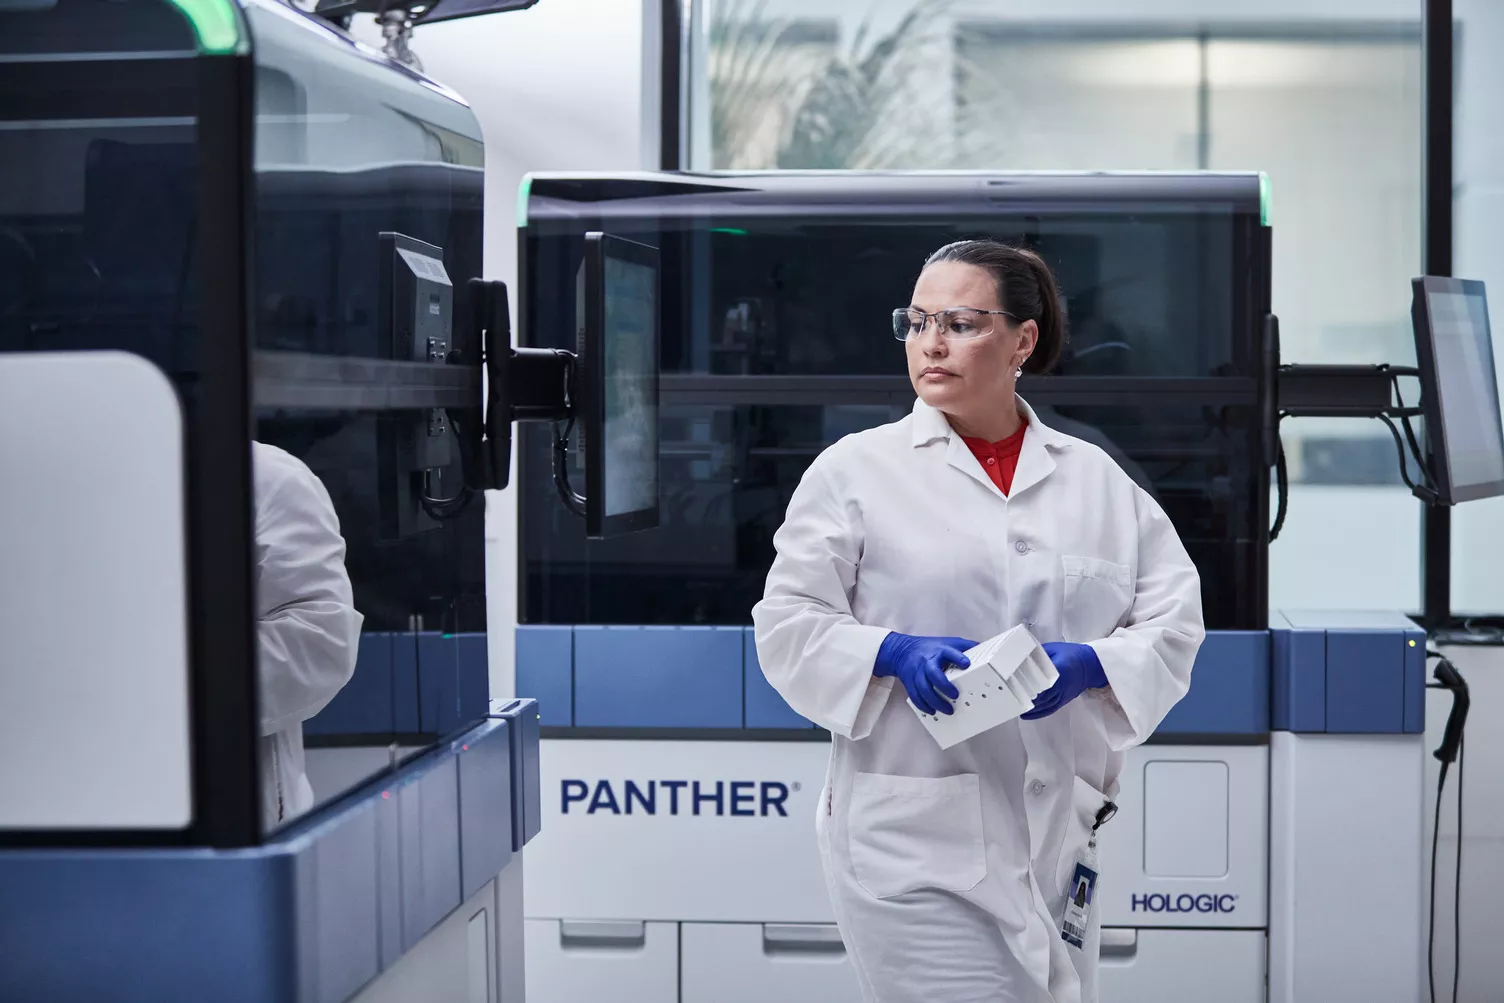 Female technician walking through Panther systems in a lab setting